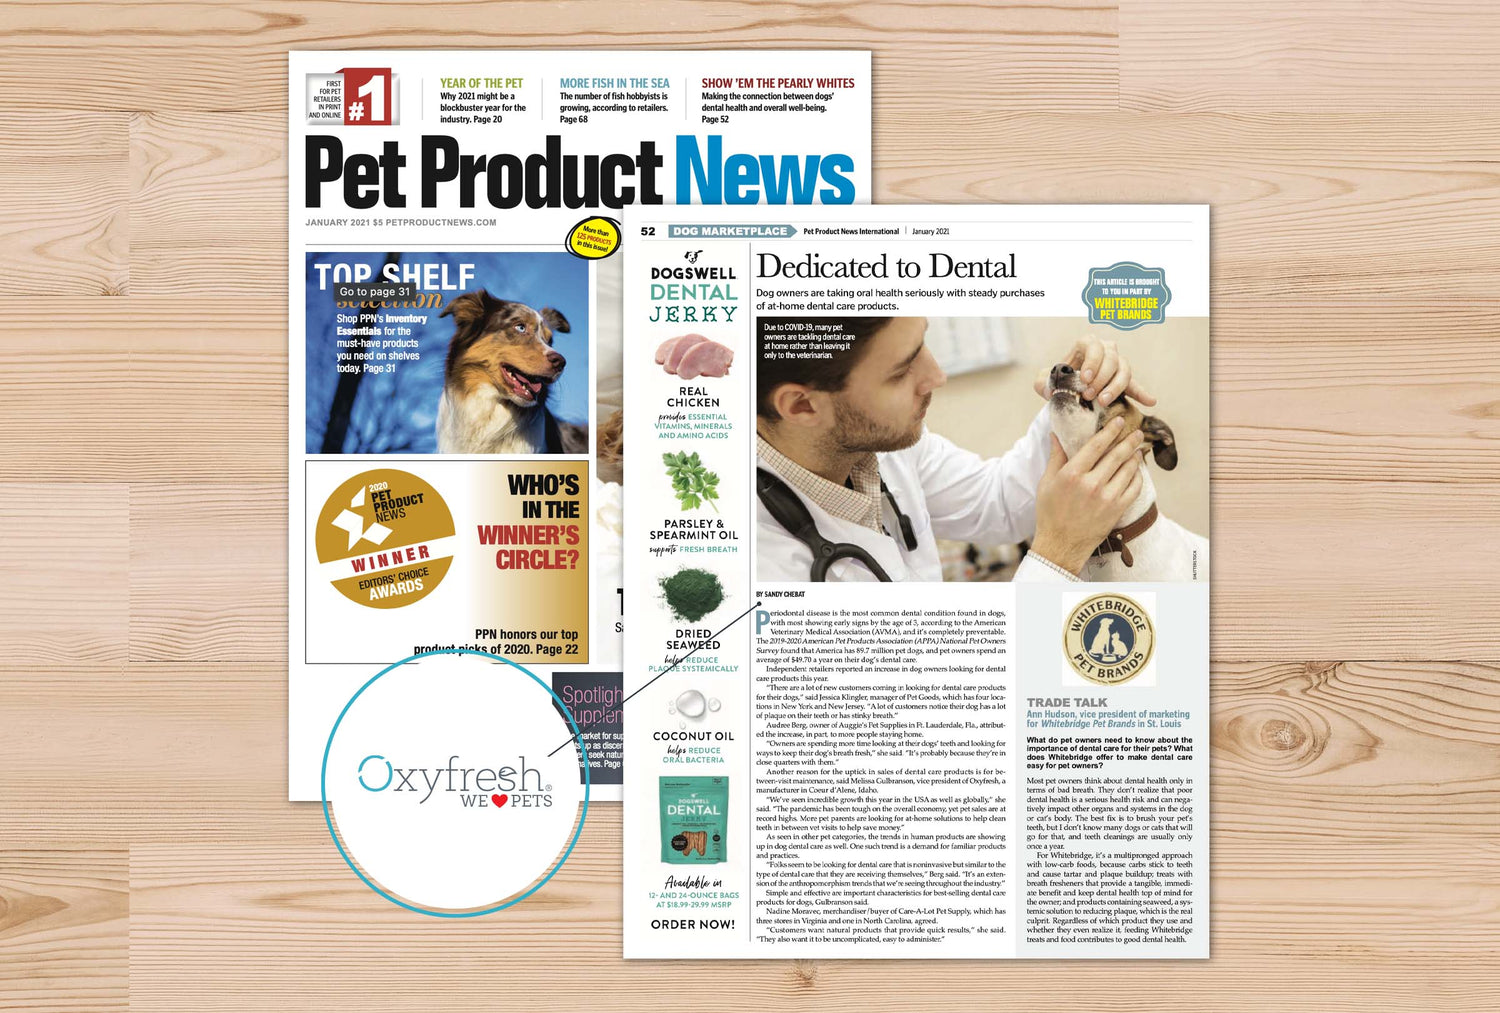 Oxyfresh Featured in January 2021 issue of Pet Product News